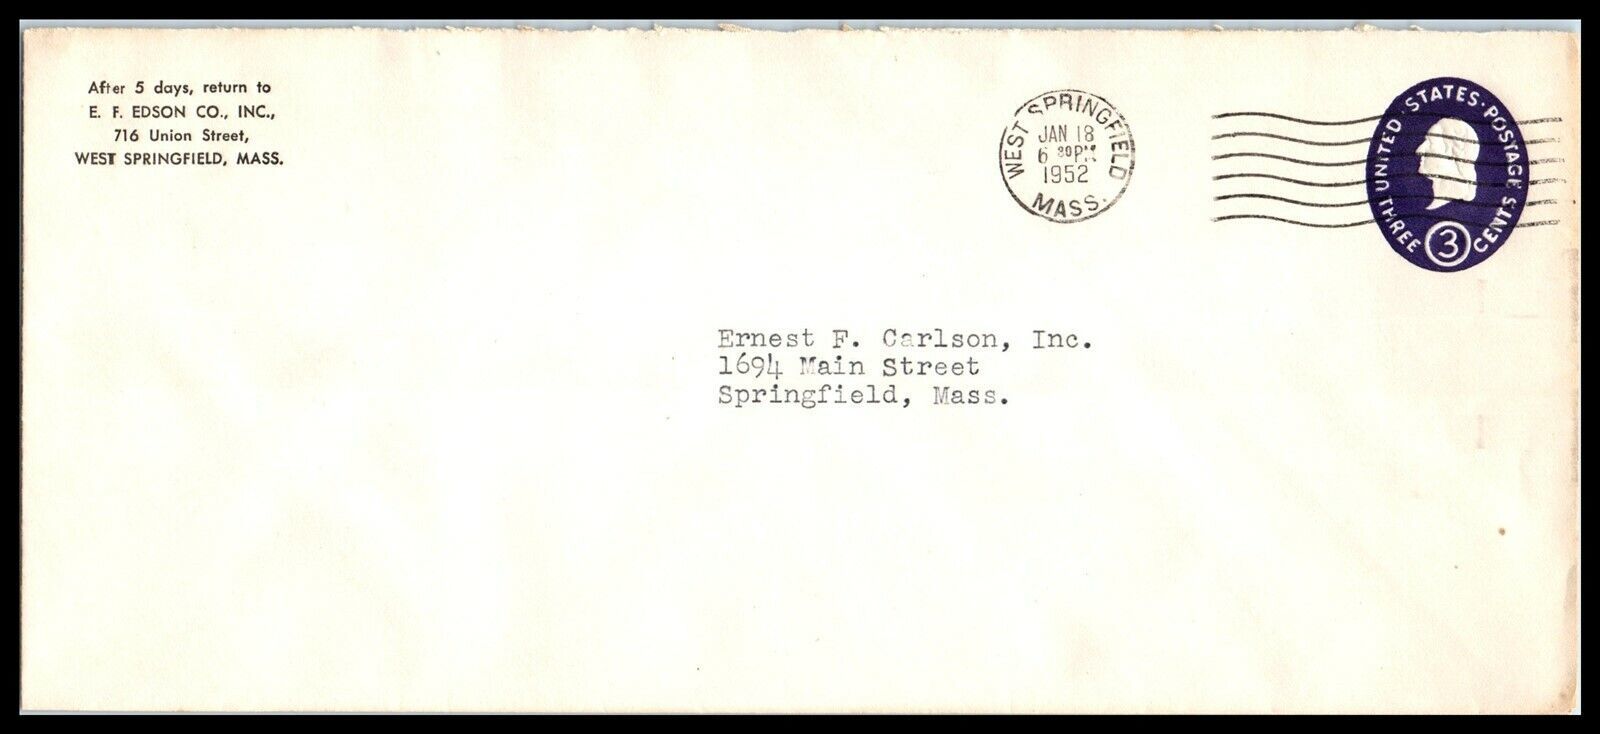 Primary image for 1952 US Cover - EF Edson Co, West Springfield, Massachusetts D9